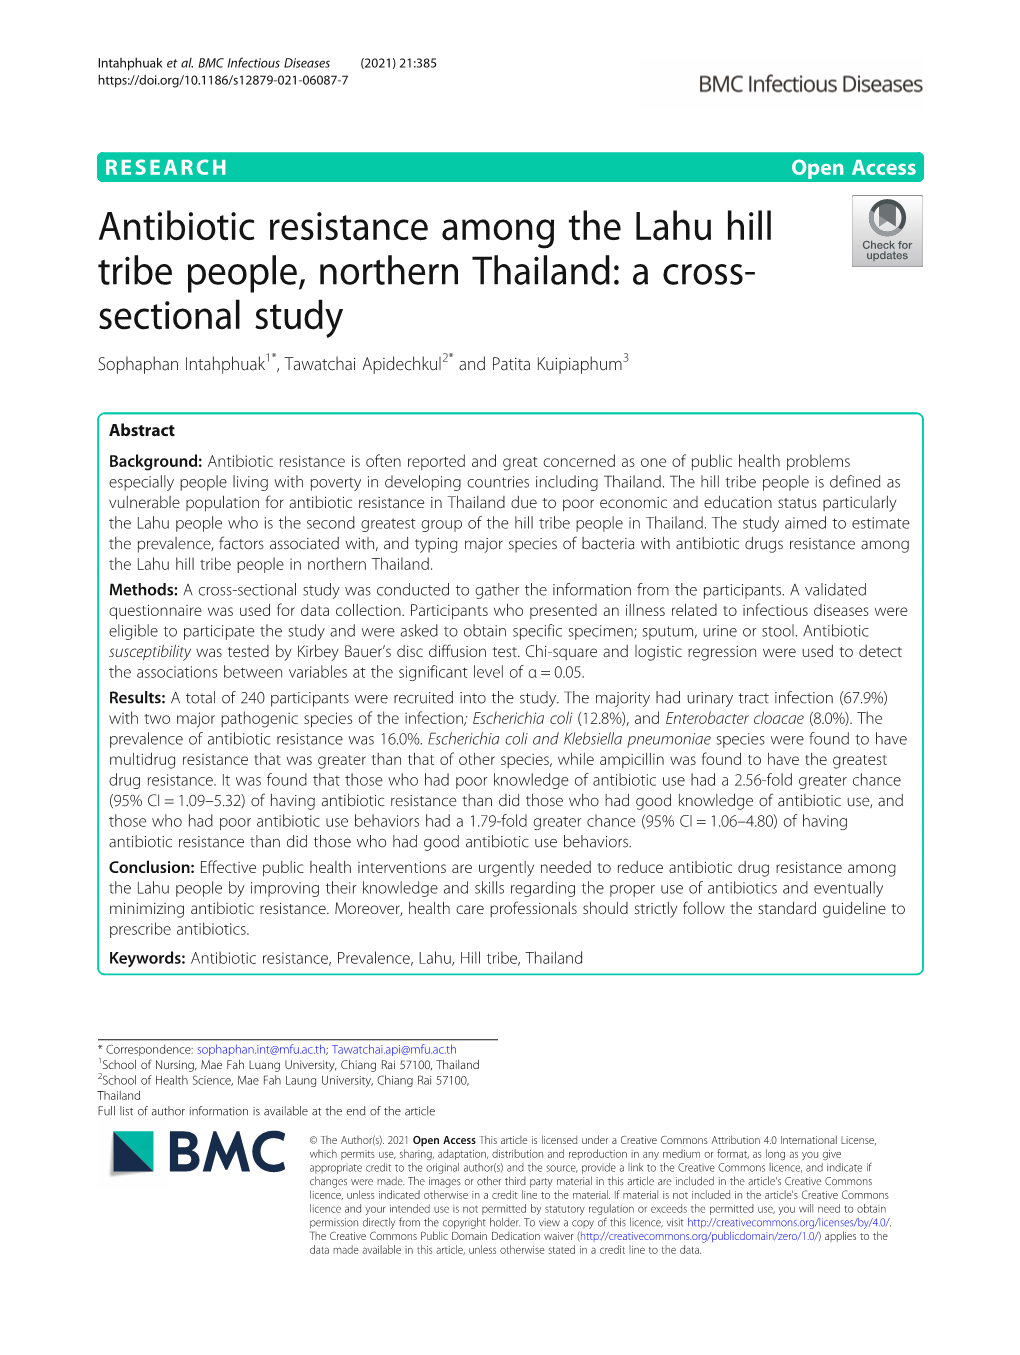 Antibiotic Resistance Among the Lahu Hill Tribe People, Northern Thailand